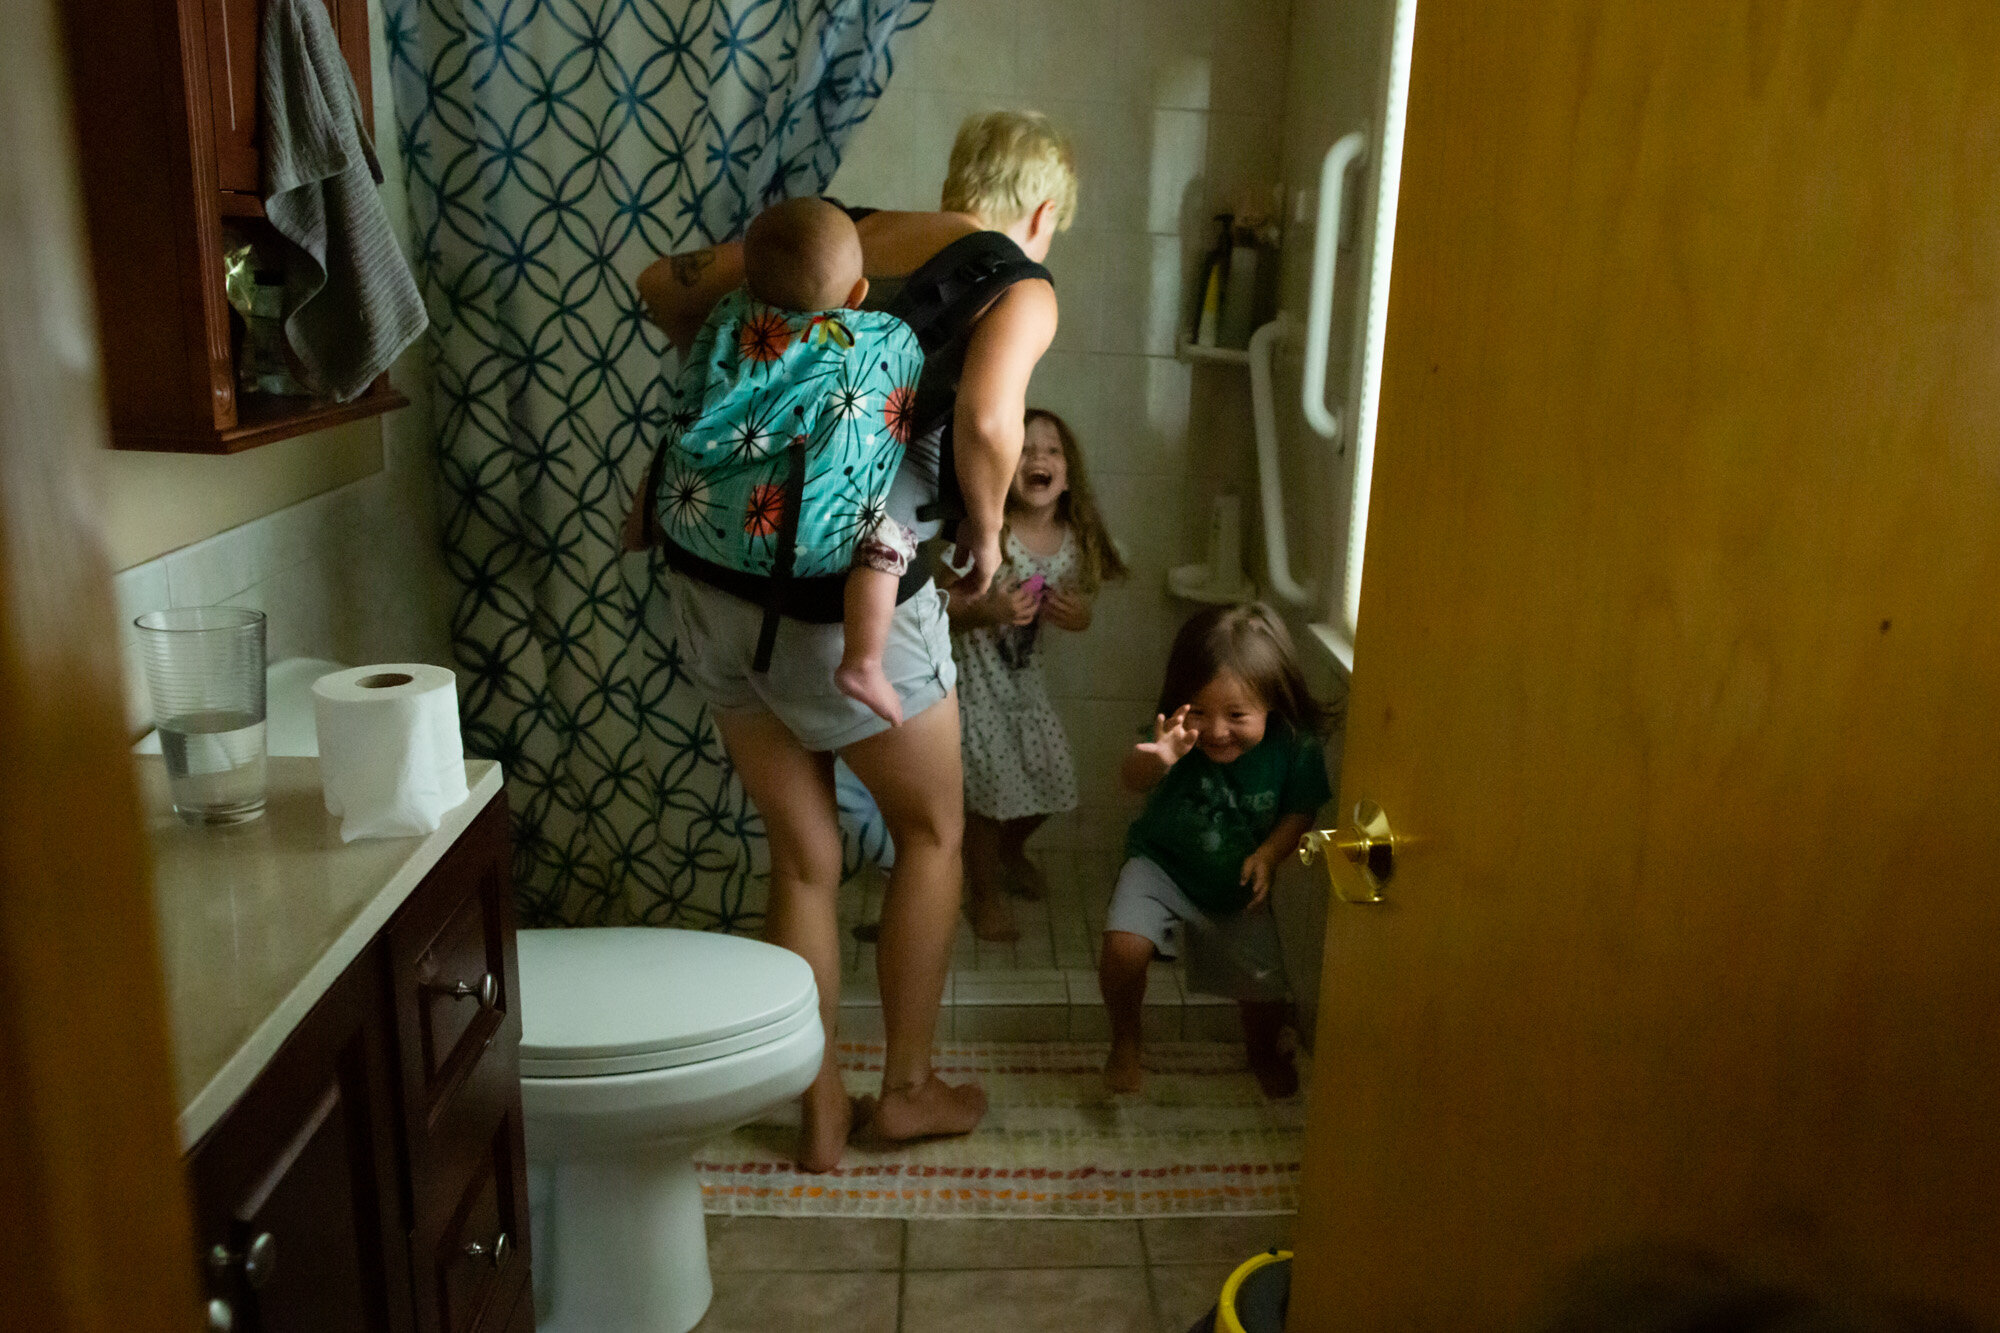 mom chasing children who were hiding in the shower